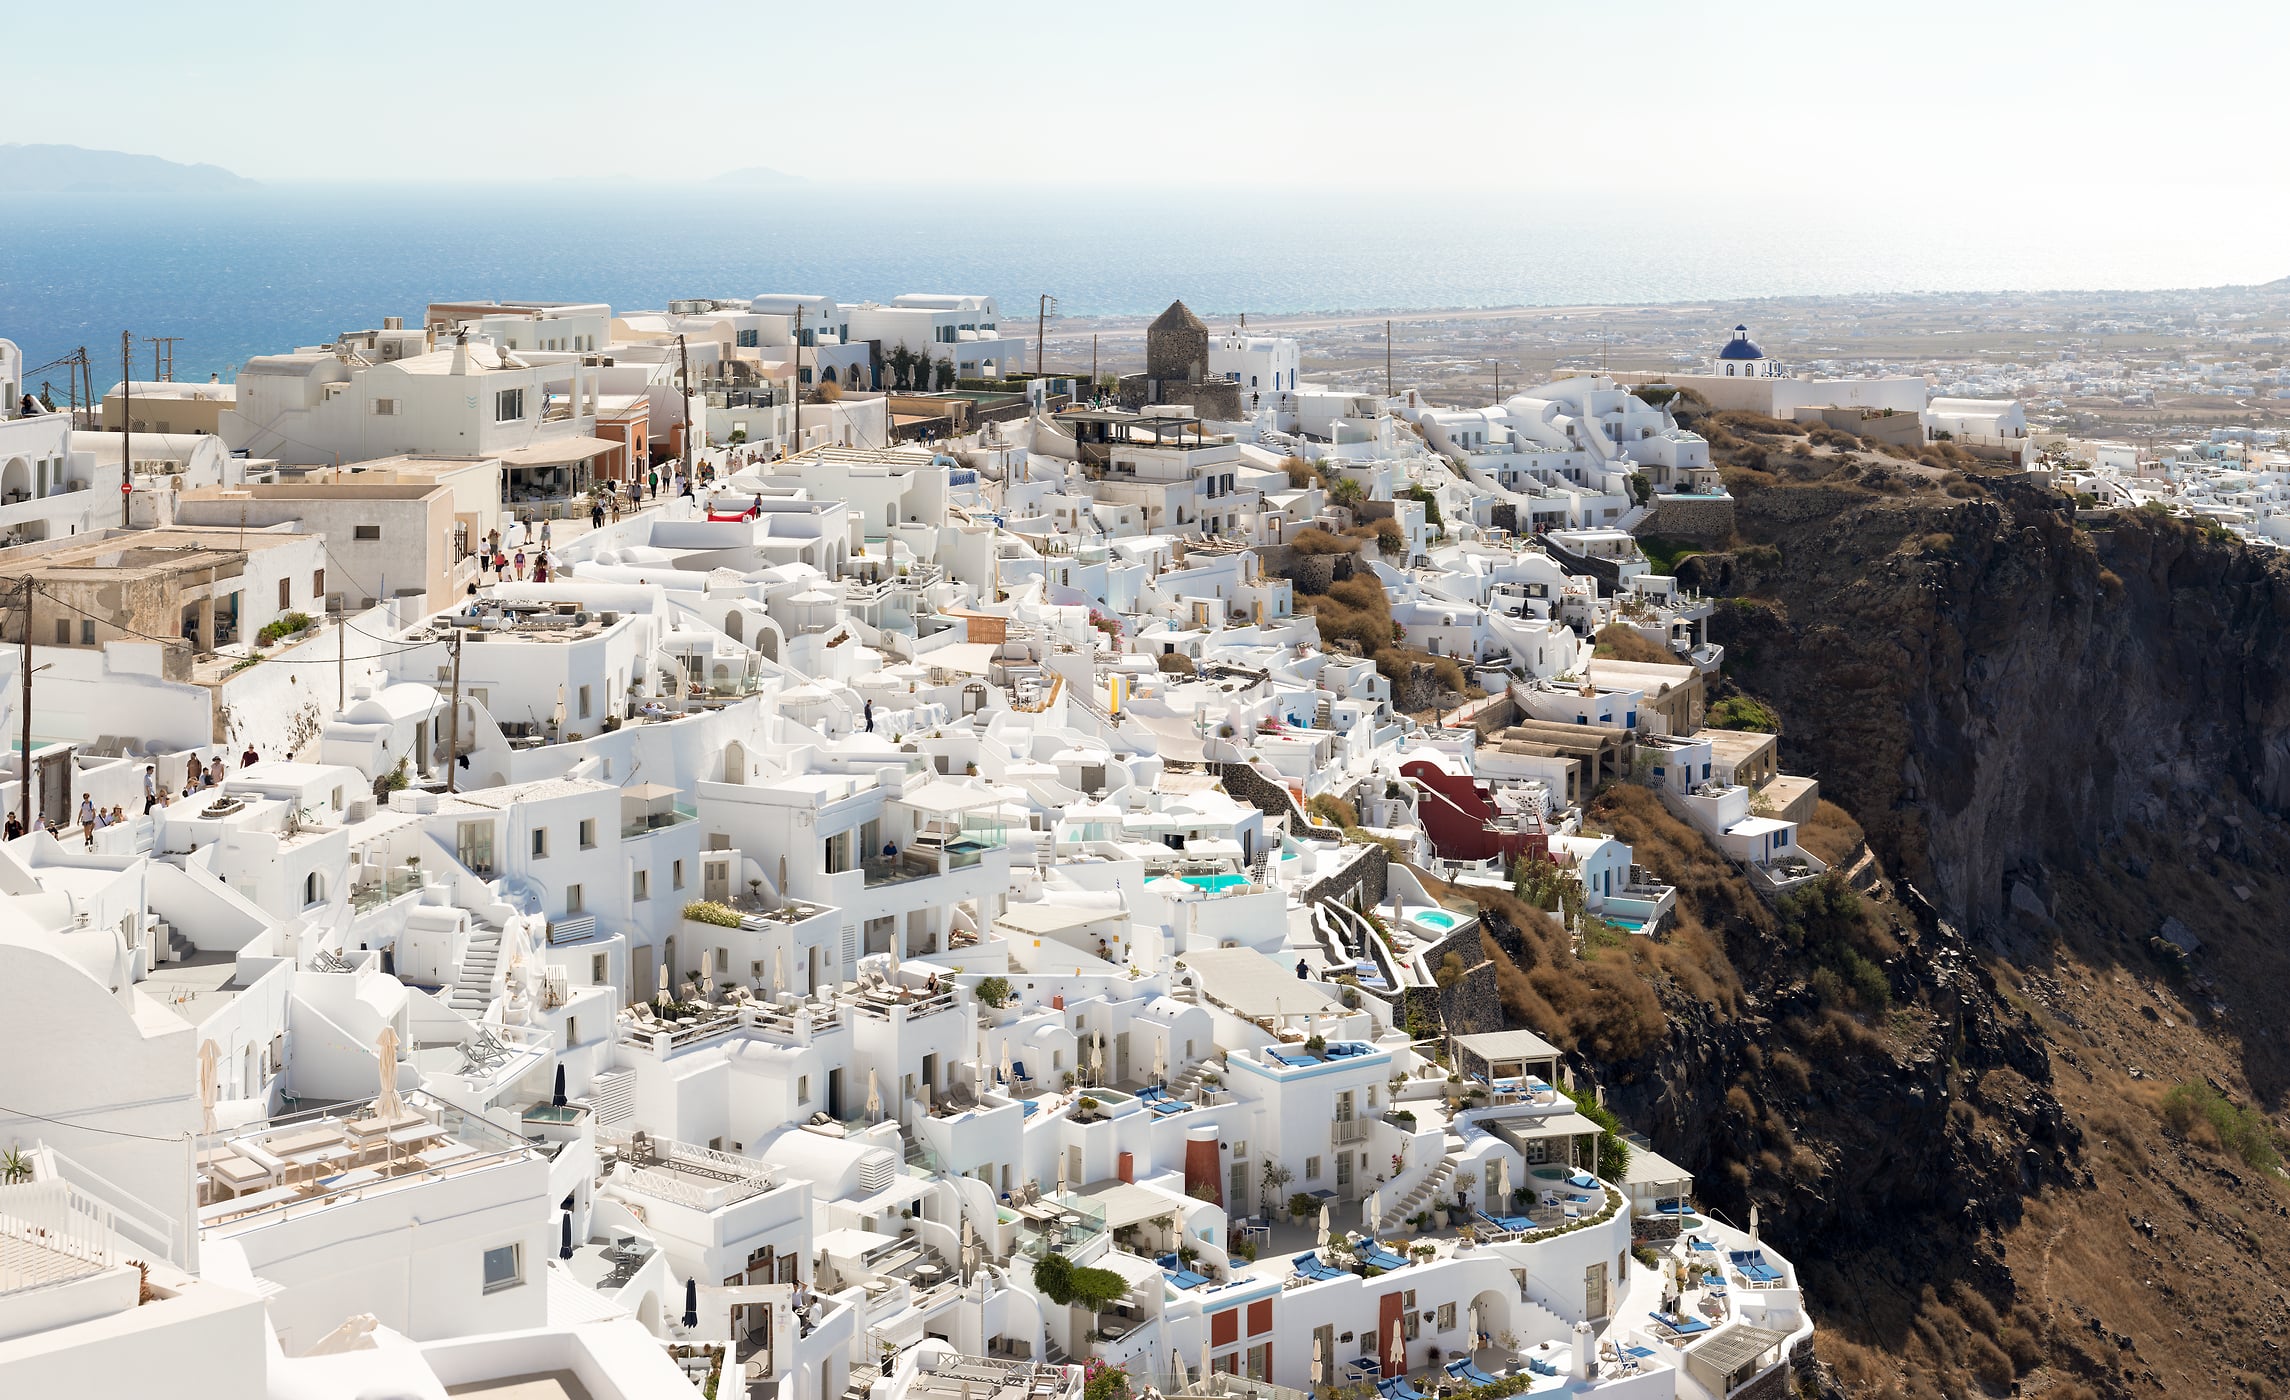 981 megapixels! A very high resolution, large-format VAST photo print of buildings on a cliff in Imerovigli, Santorini, Greece; photograph created by Dan Piech.